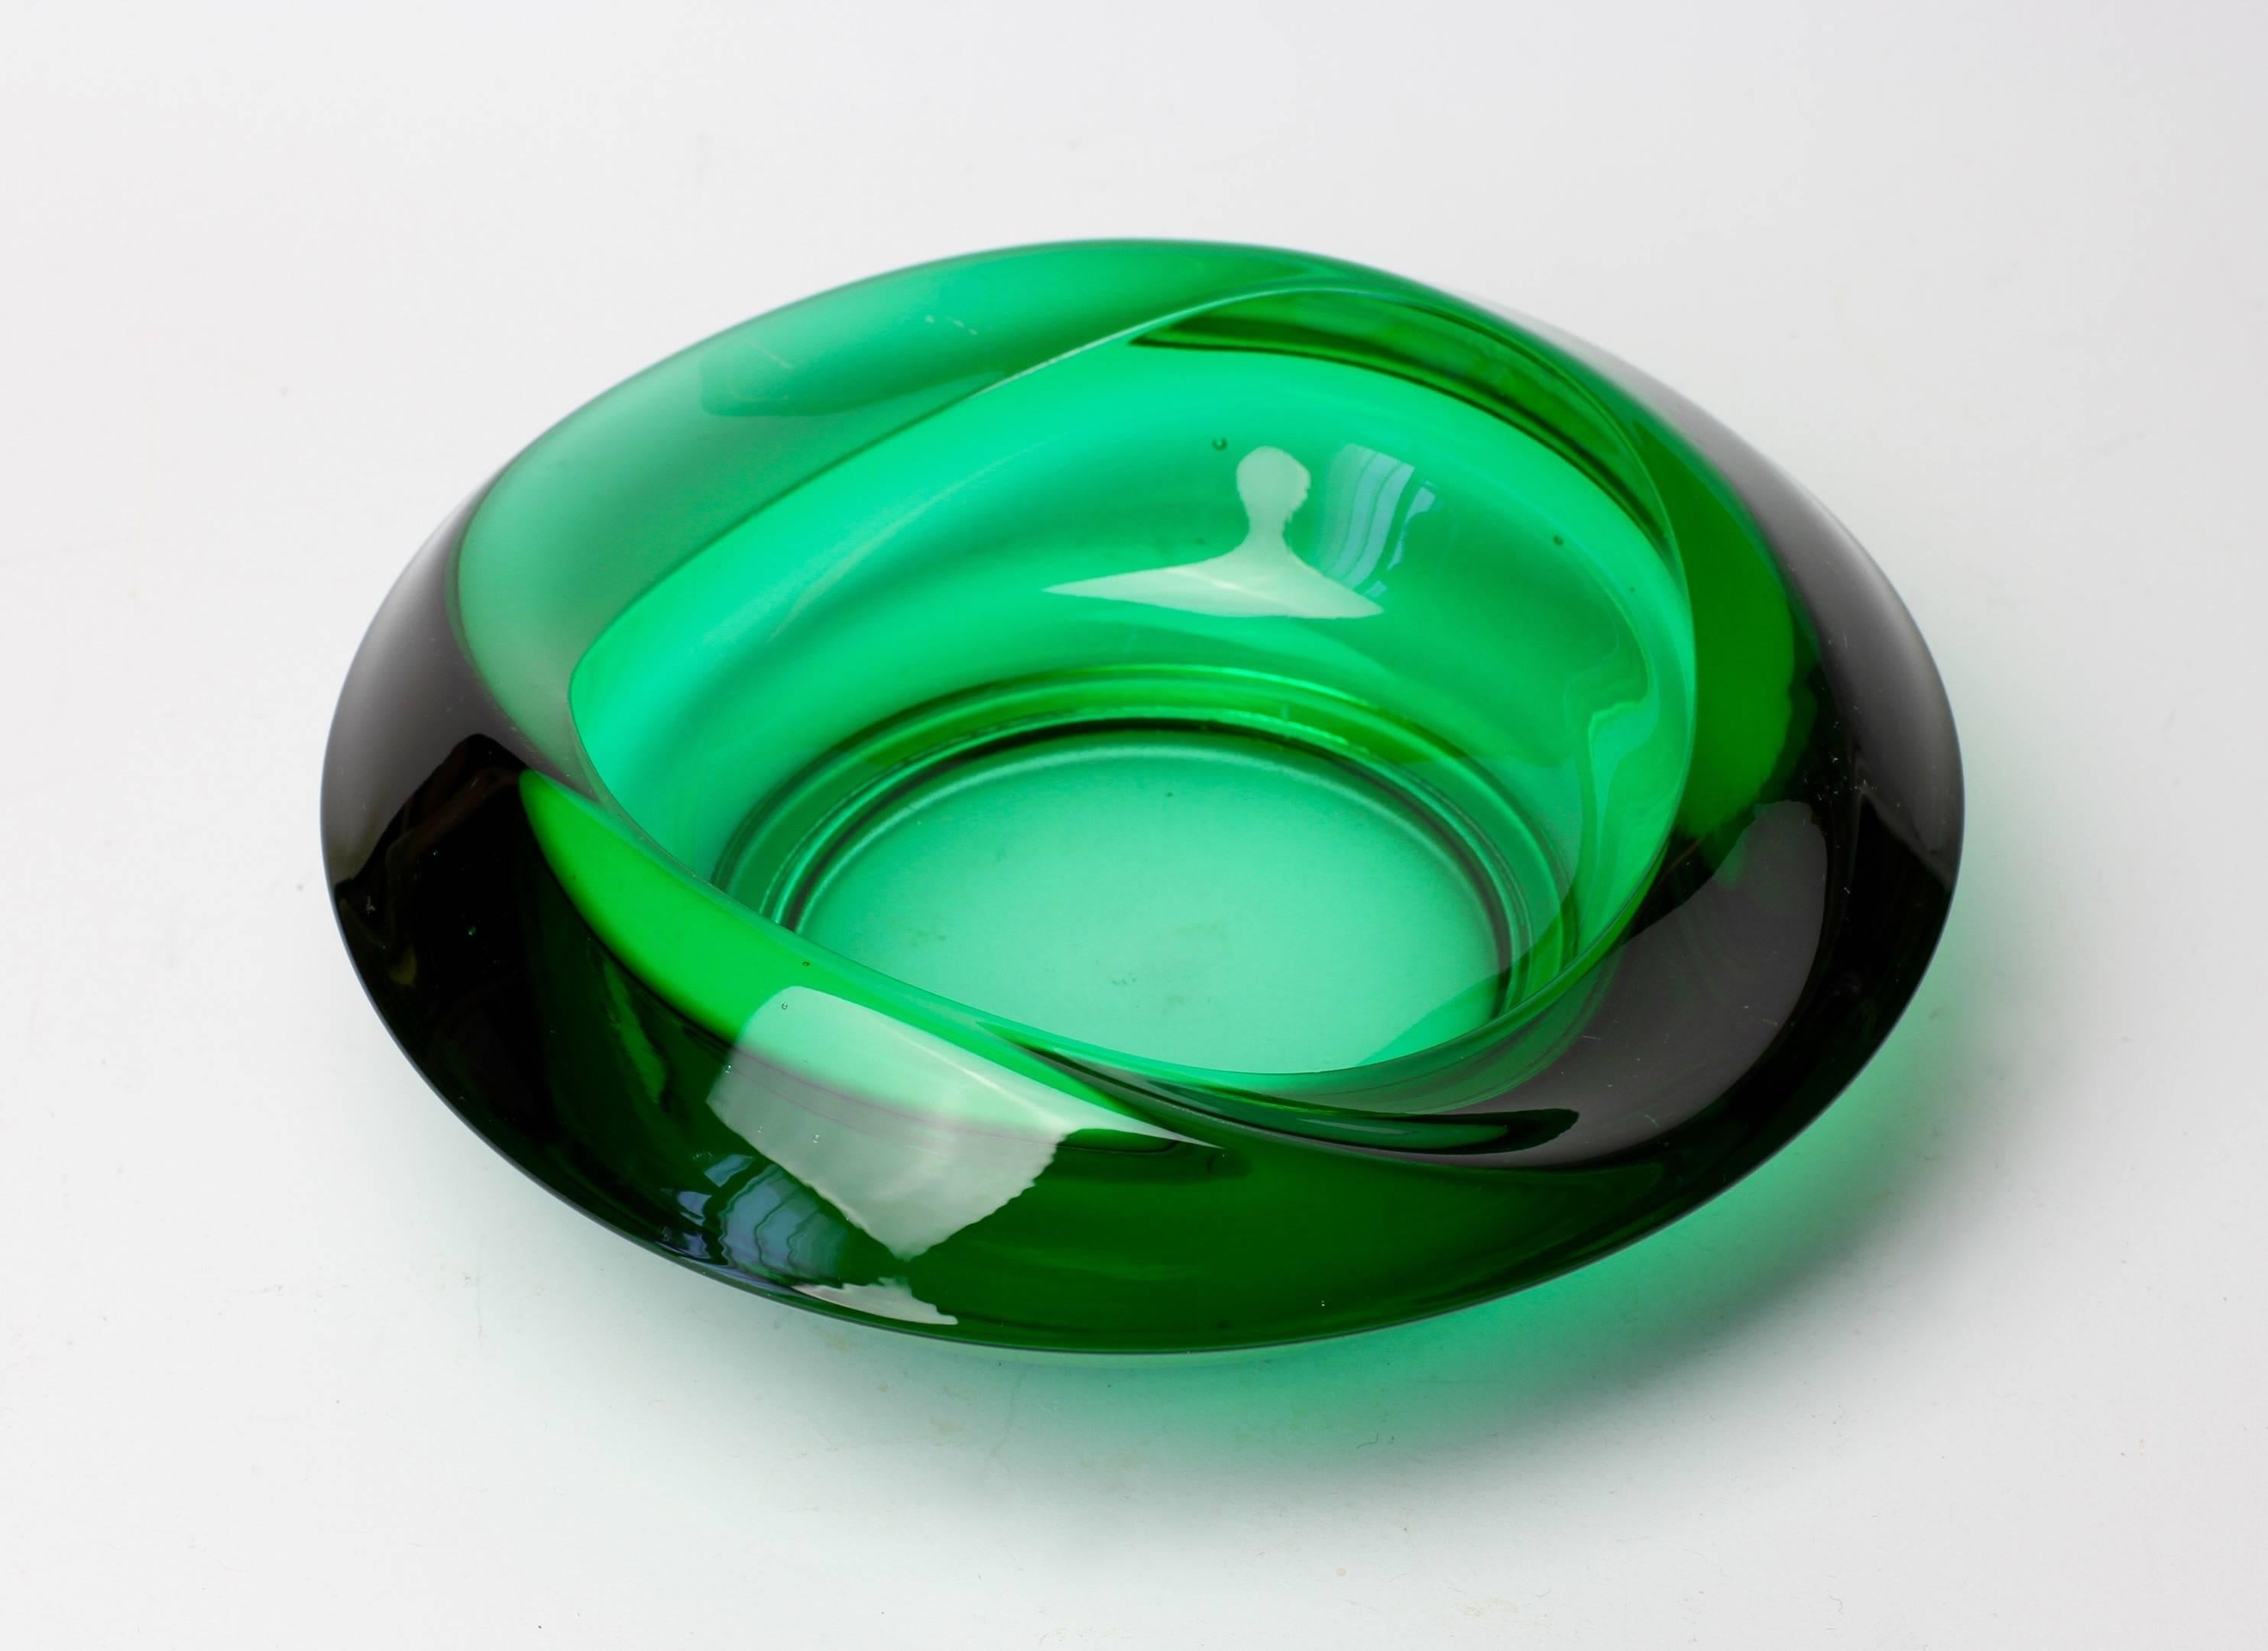 Sklo Union Czechoslovakian green pressed glass bowl designed by Rudolf Jurnikl for Rosice Glassworks in 1962. Captured in this wonderful deep emerald green glass and curved form giving the piece a contemporary Art Deco style and 'feel'.

This is